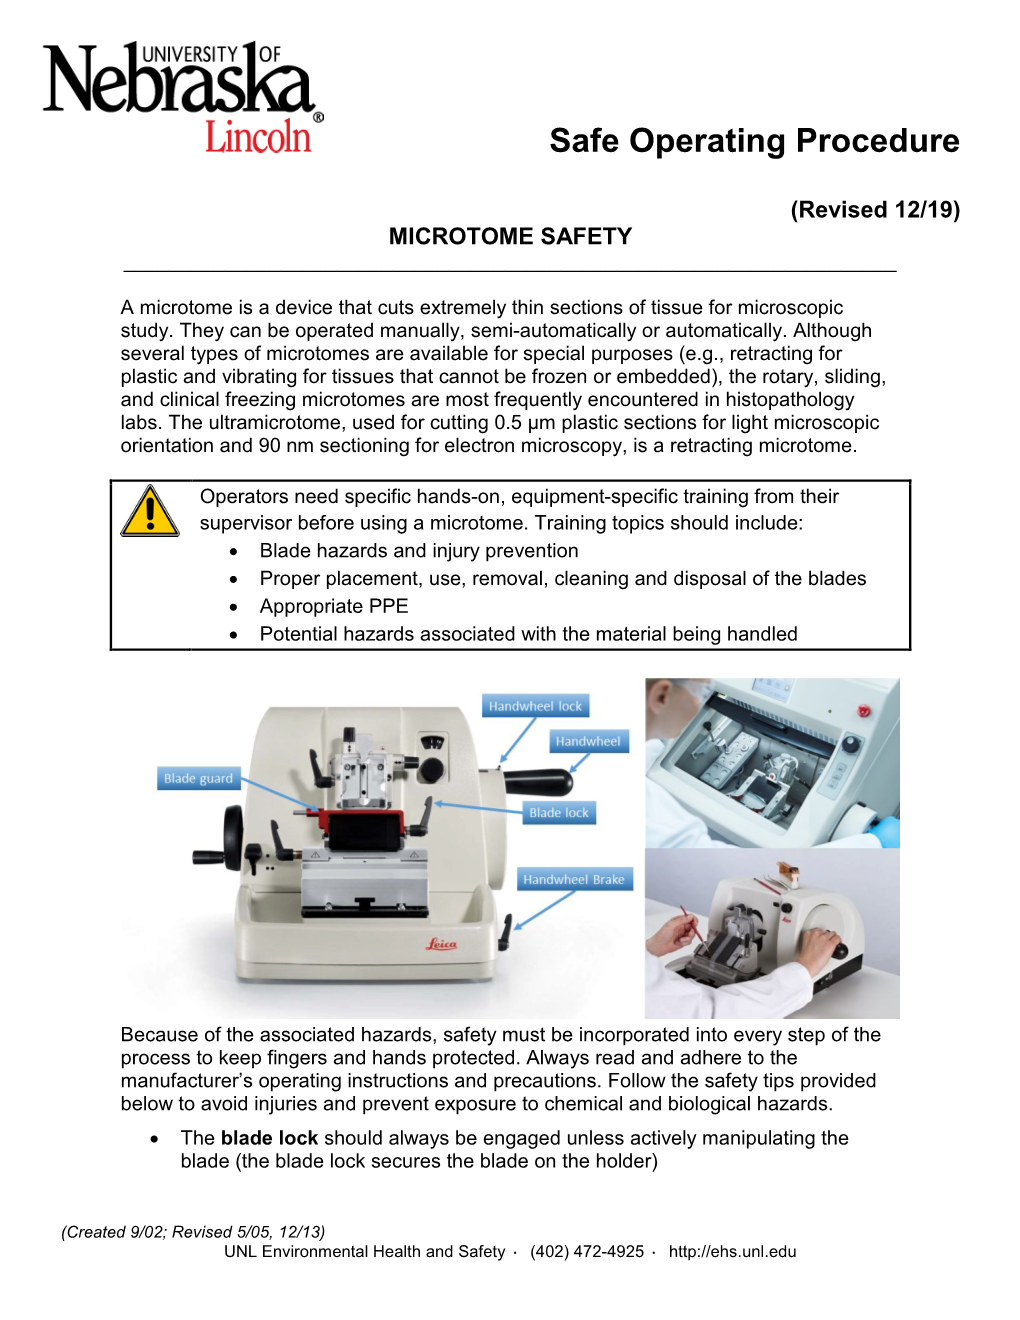 Microtome Safety ______